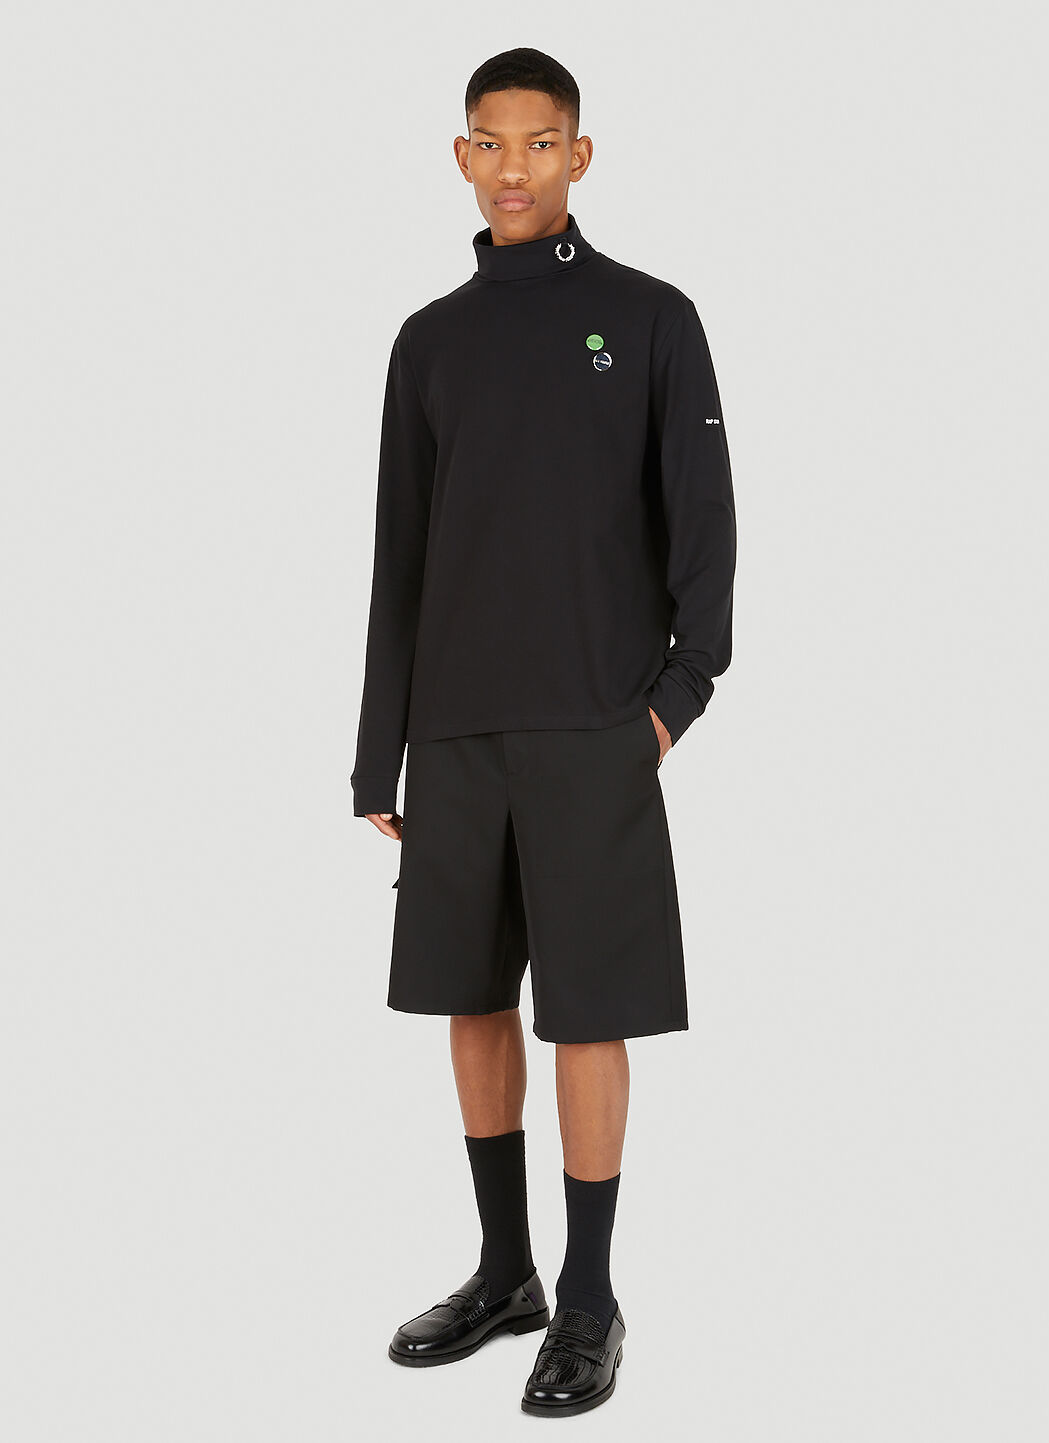 Raf Simons x Fred Perry Laurel Wreath Roll Neck Top in Black | LN-CC®